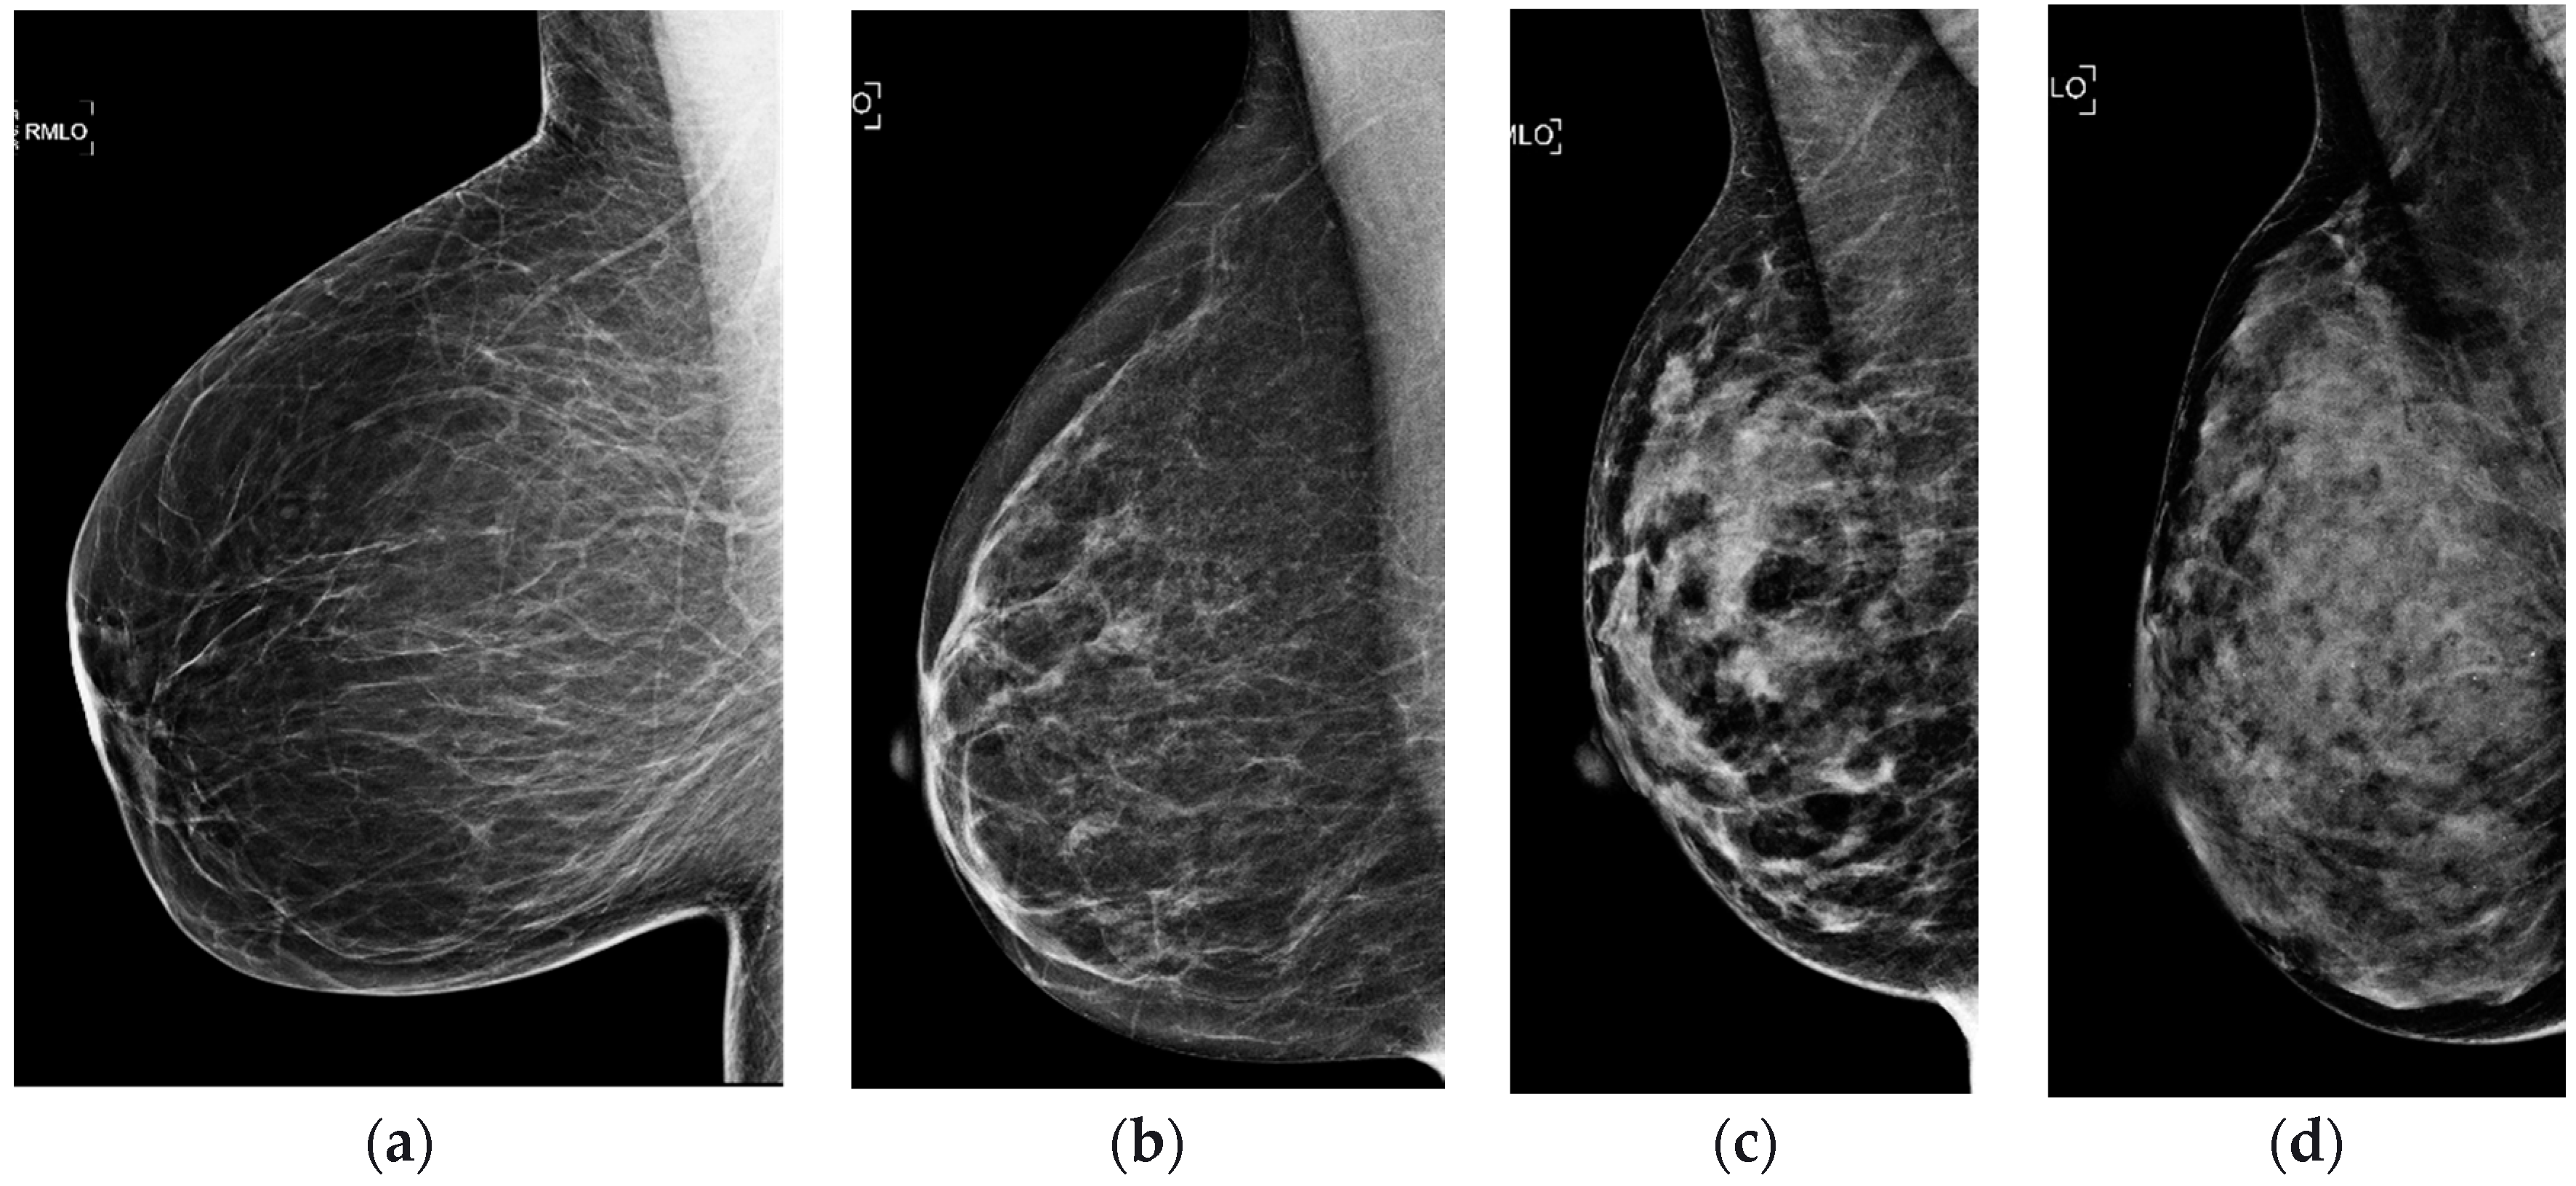 Comparison of the original breast mass images and their flipped images.